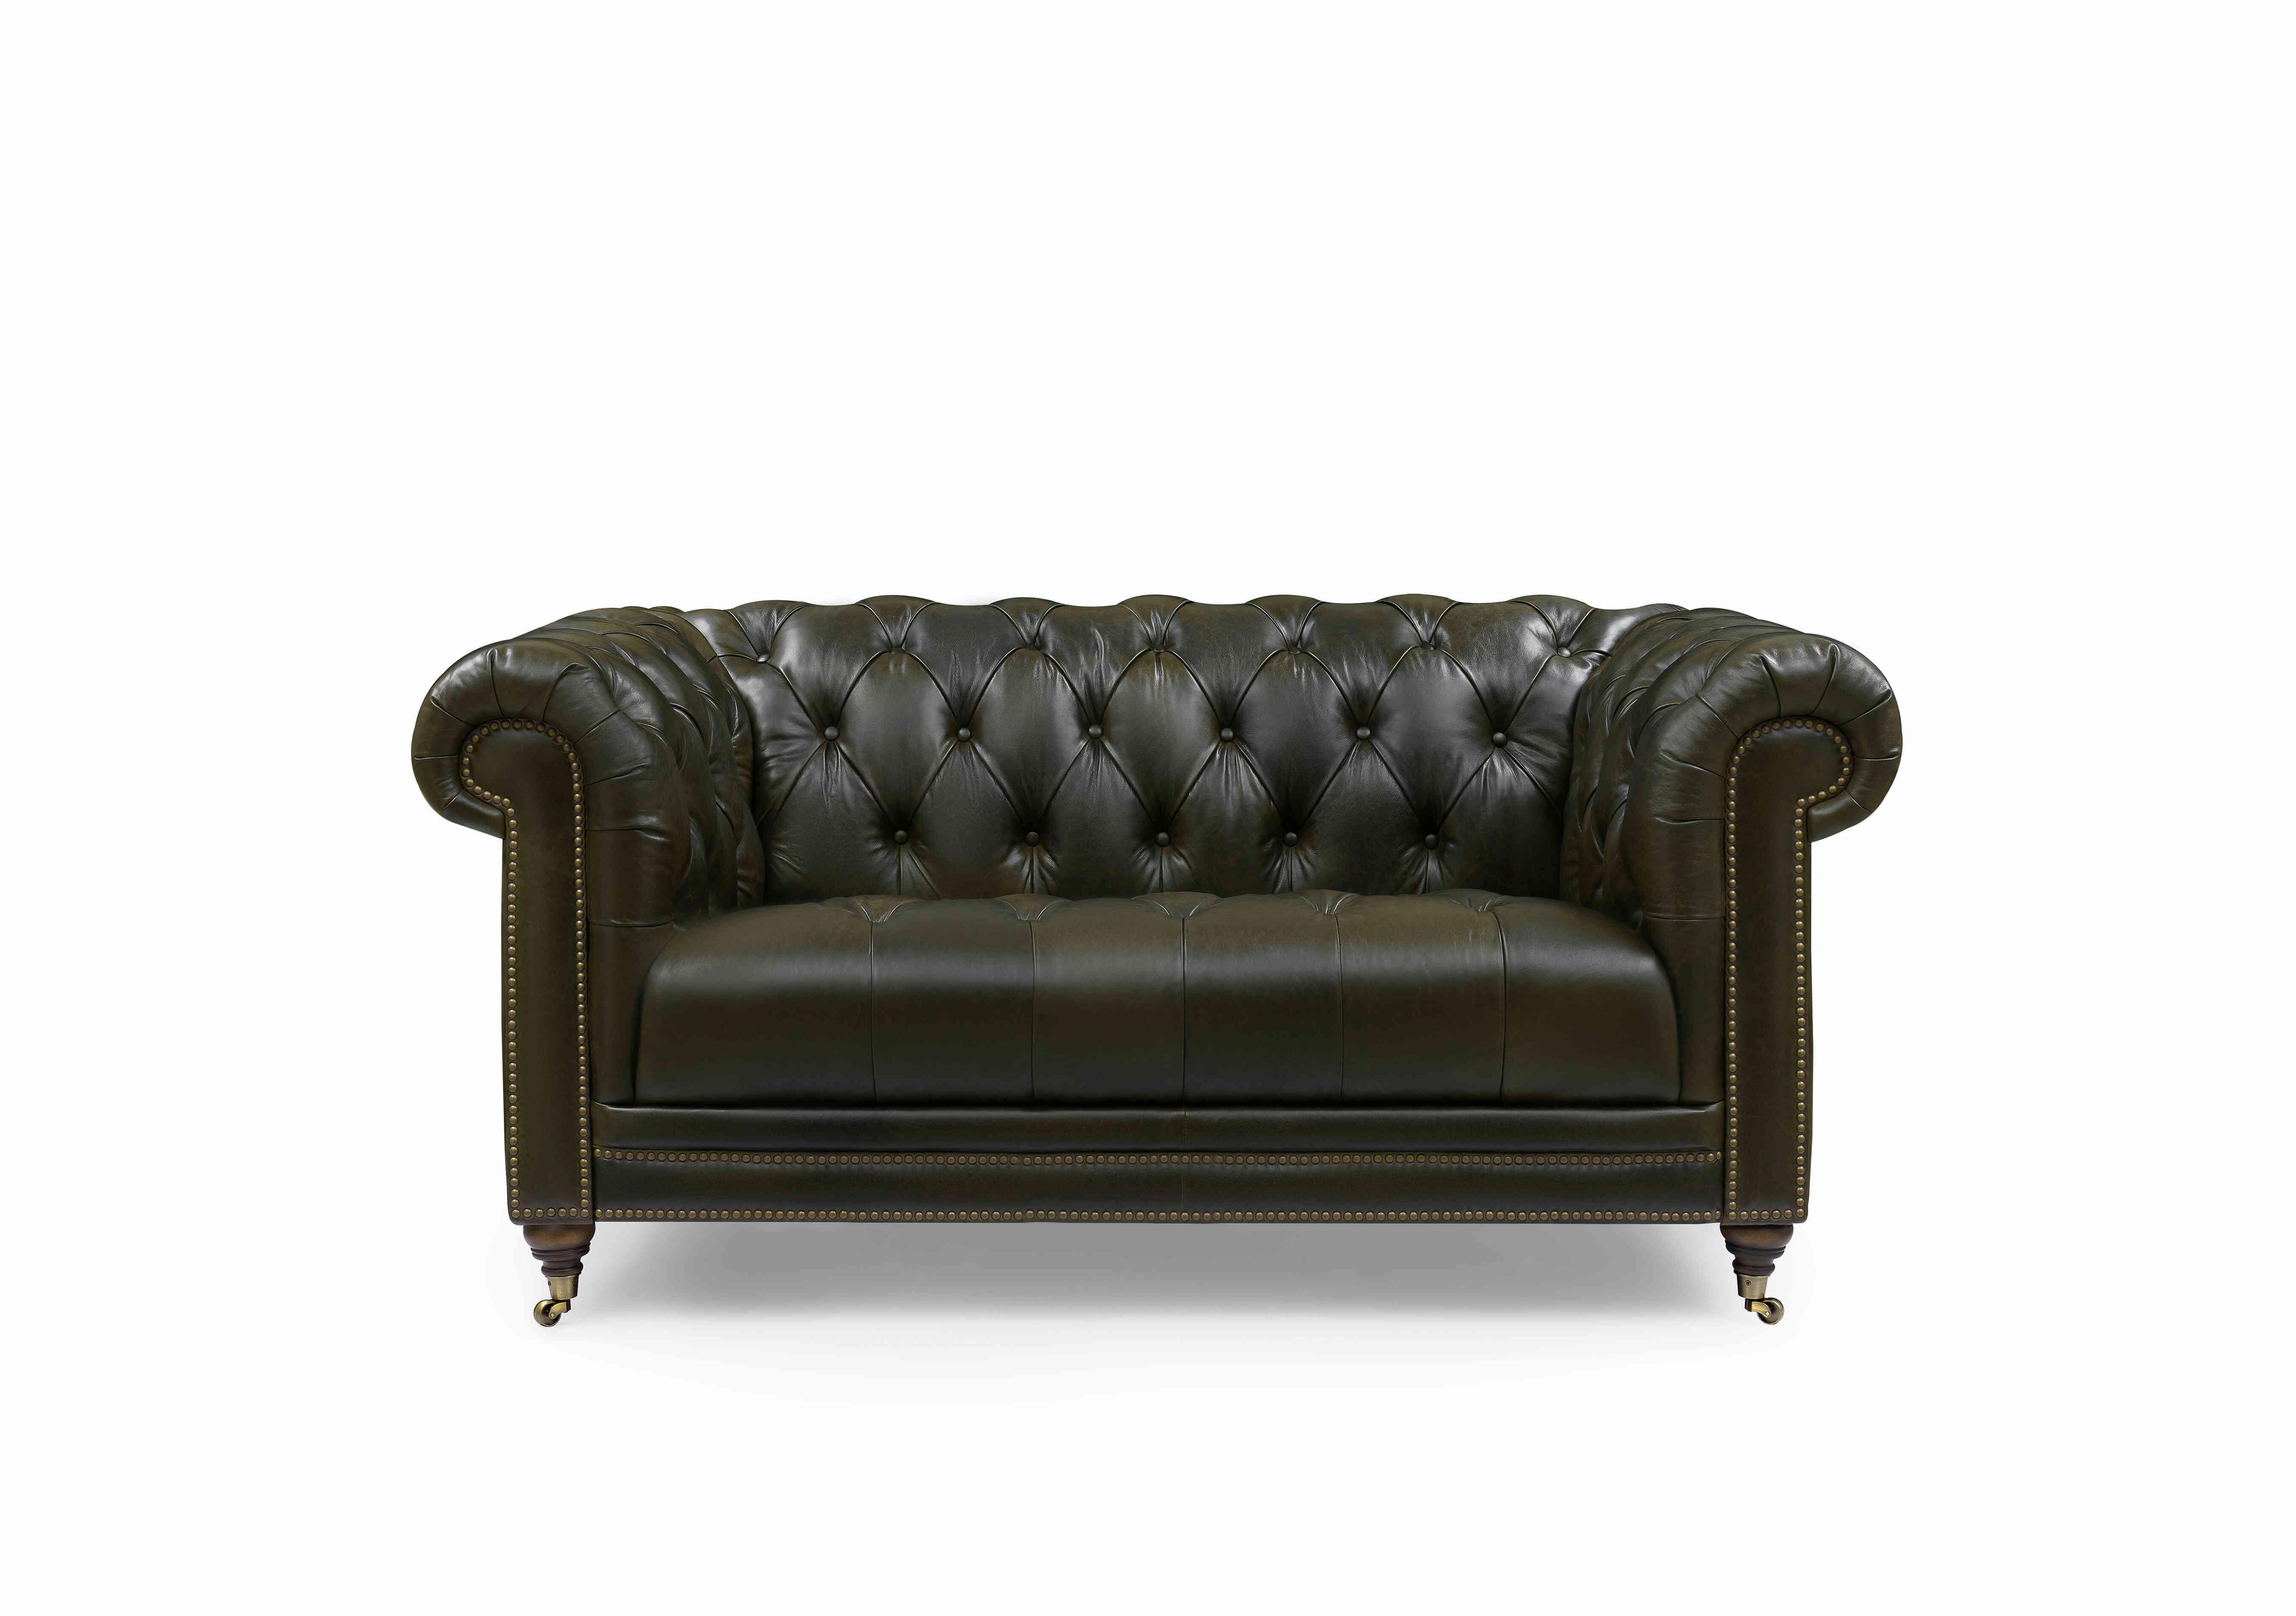 Walter 2 Seater Leather Chesterfield Sofa in X3y1-1965ls Emerald on Furniture Village